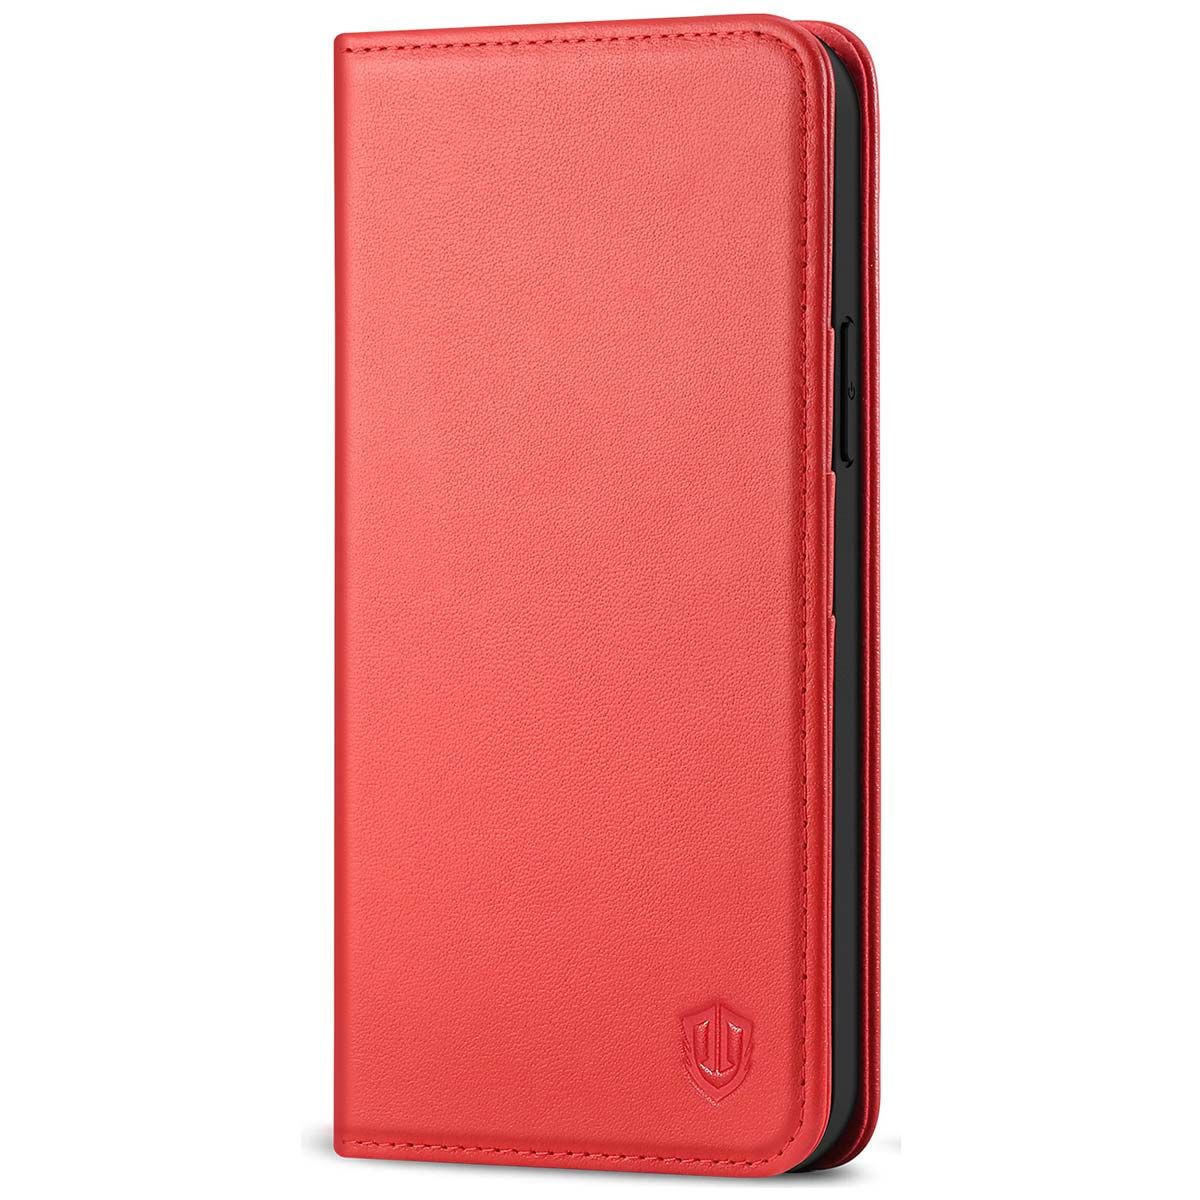 Red Violet SHIELDON Case for iPhone 13 Shockproof Genuine Leather Wallet Cover with Card Holder RFID Blocking Kickstand TPU Shell Magnetic Folio Flip Cover Compatible with iPhone 13 6.1 5G 2021